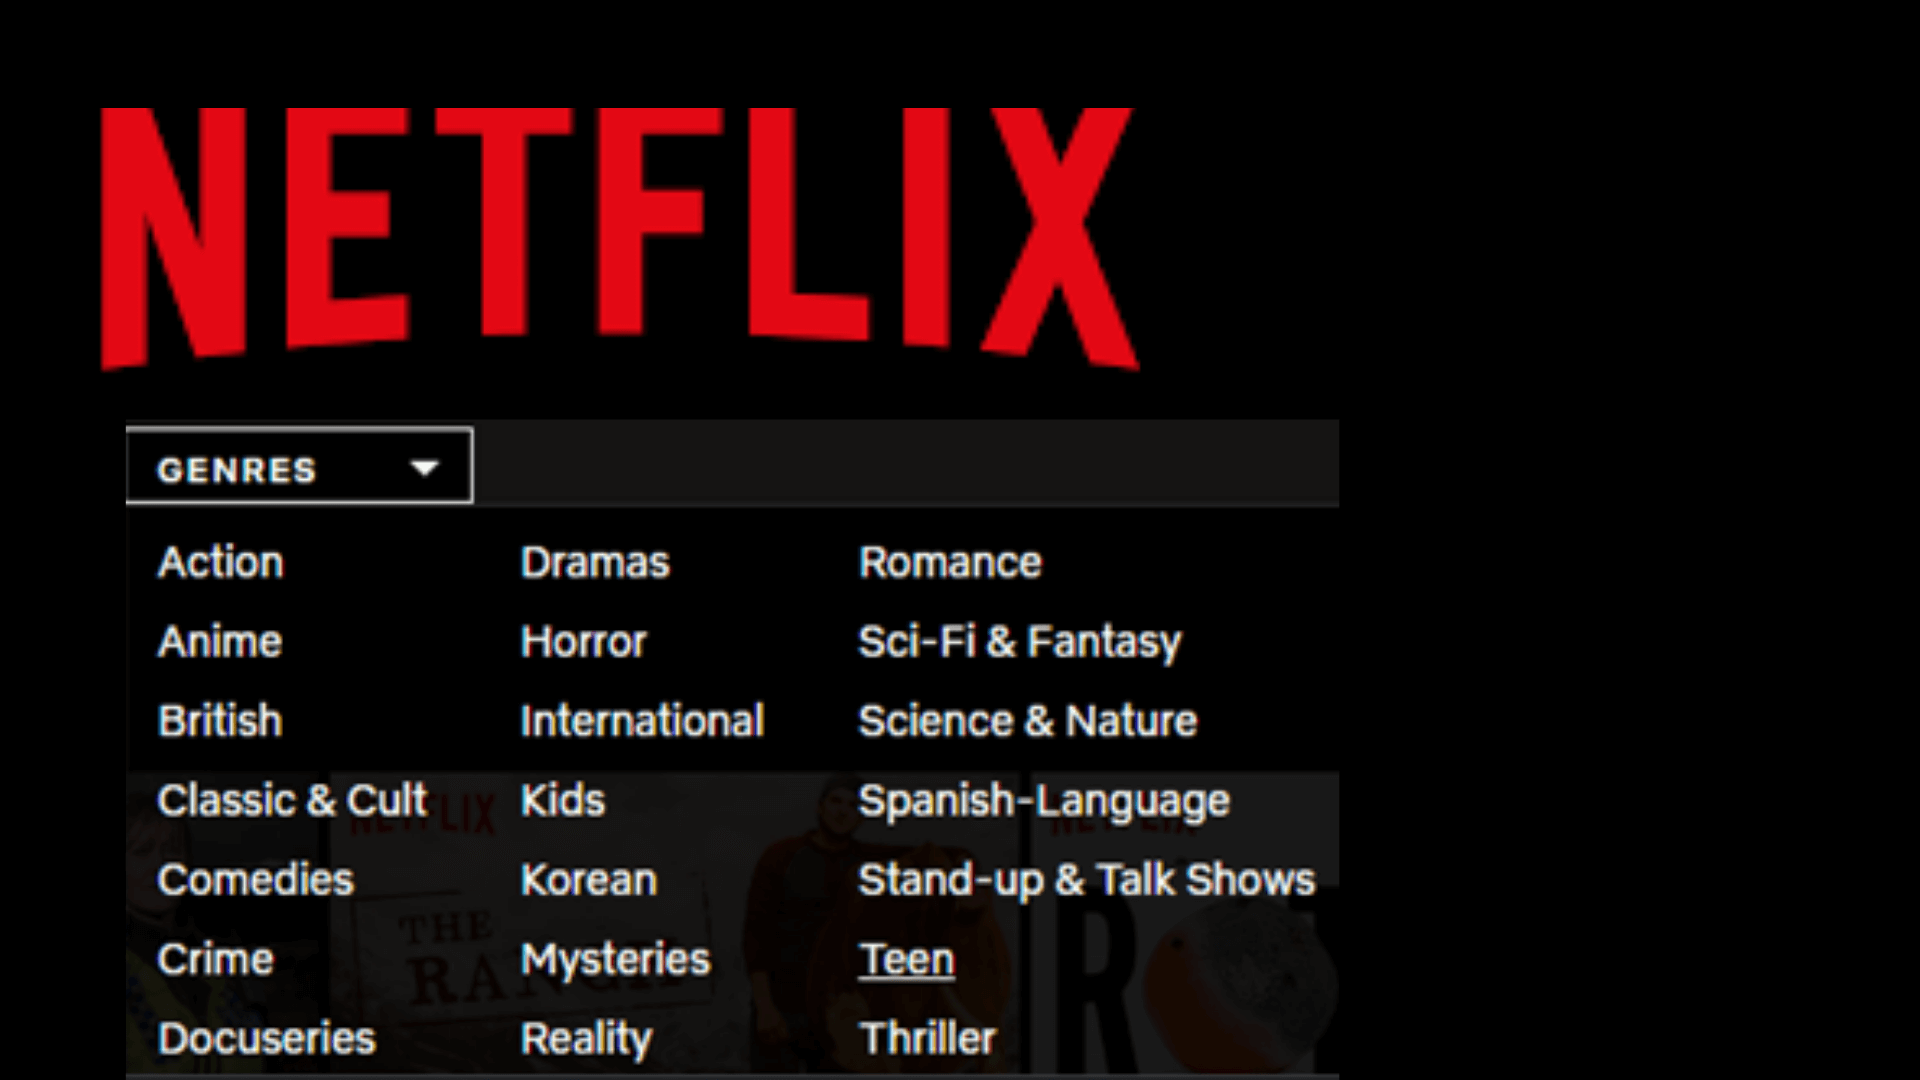 How To Browse Different Genres On Netflix?